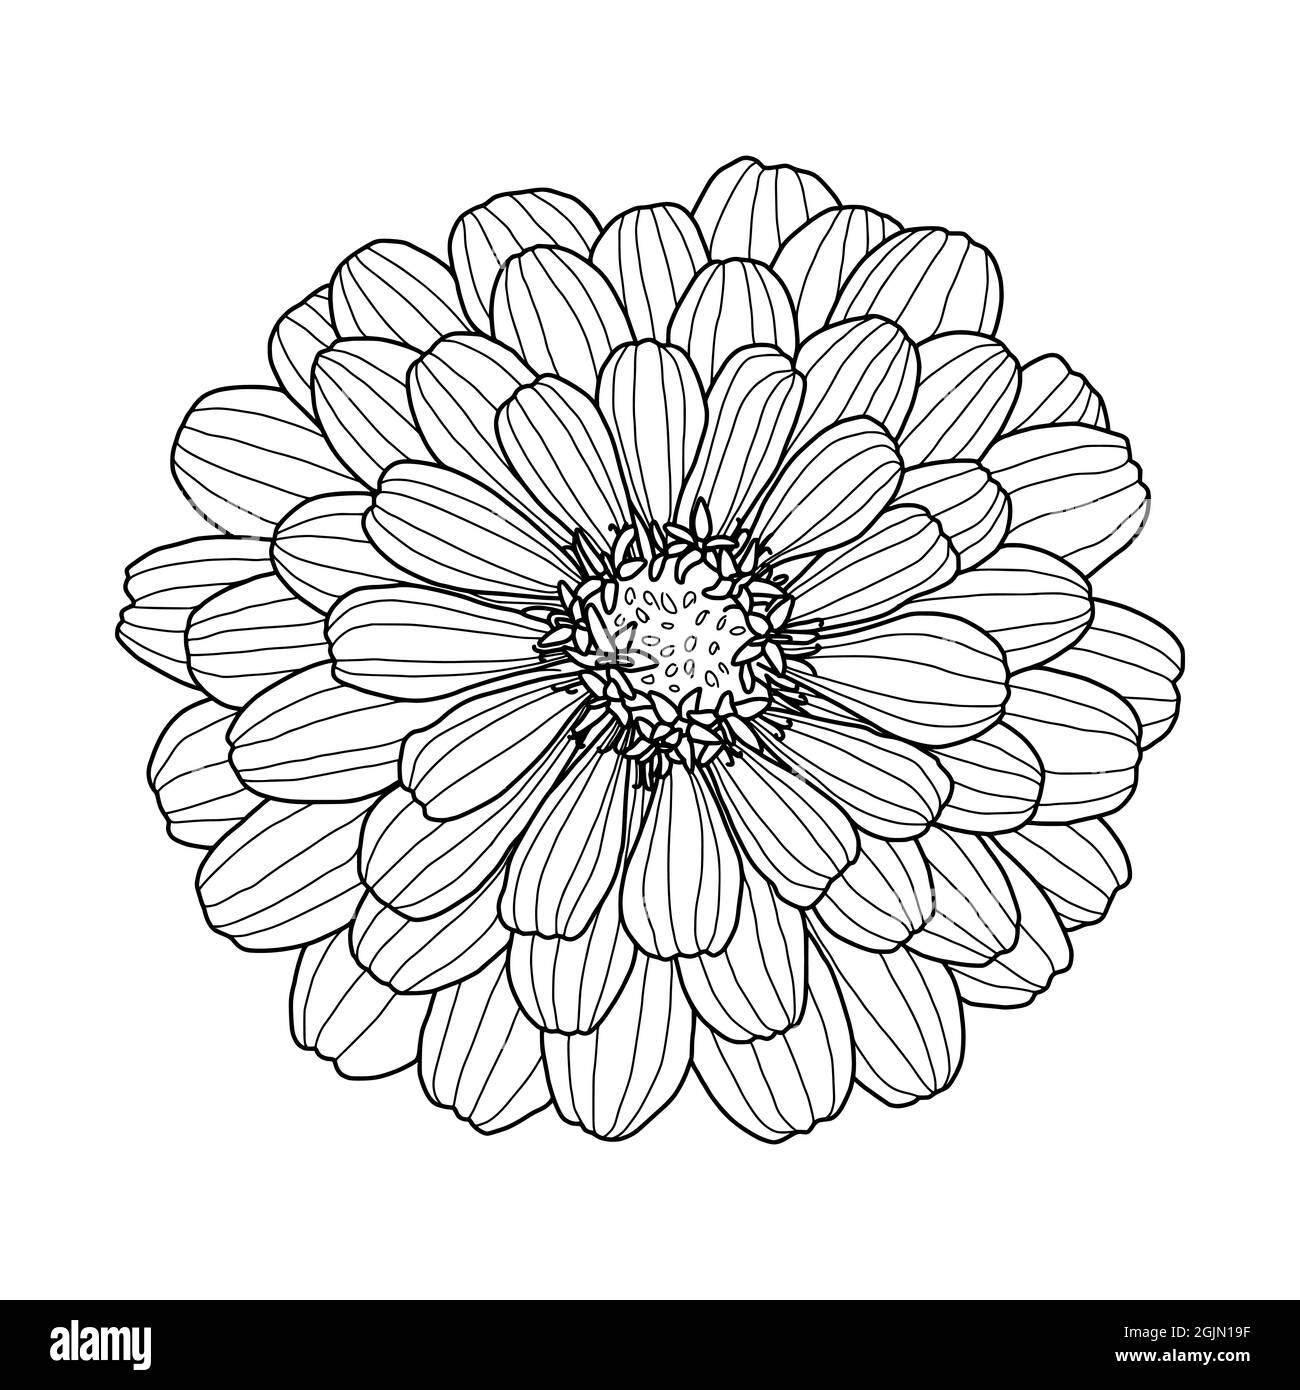 Hand drawing of Zinnia flower head isolated on white background ...